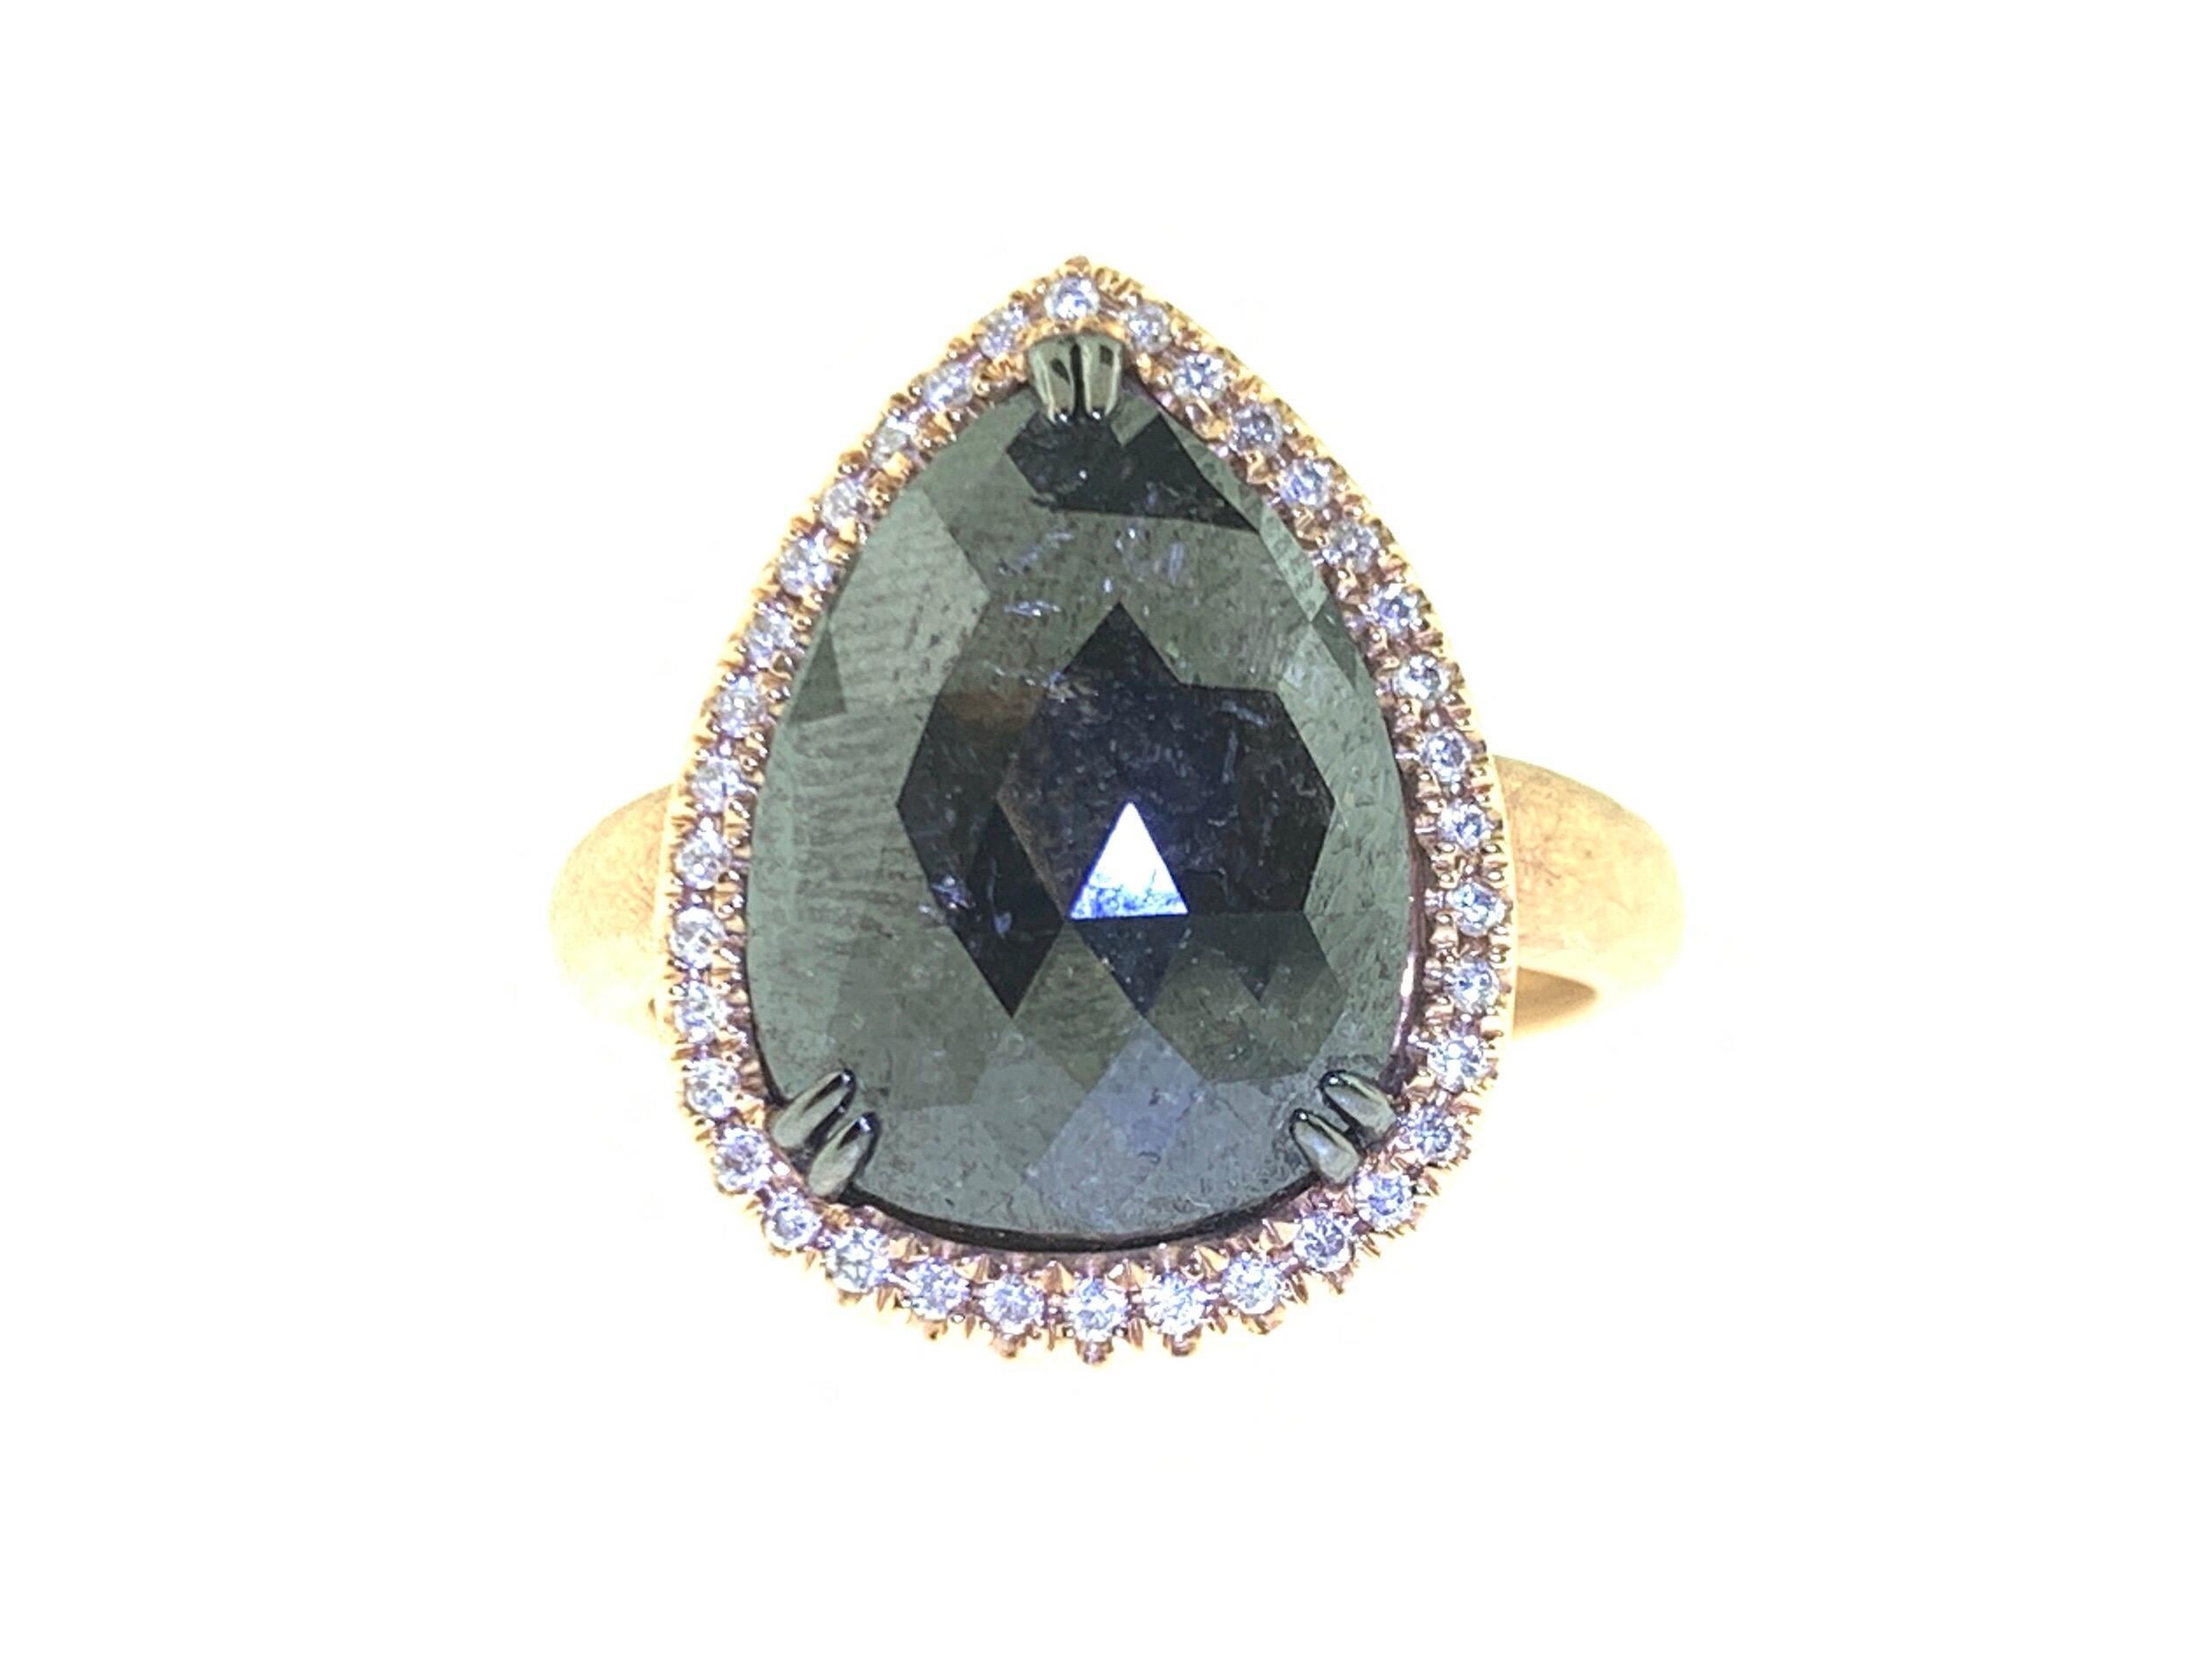 This stunning cocktail ring features a beautiful 4.92 Carat Pear Shape Rose Cut Black Diamond with a Diamond Halo. This Ring is set in 18k Rose Gold. Total Diamond Weight (not including center stone) = 0.14 Carats. Ring Size is 6 1/2.
